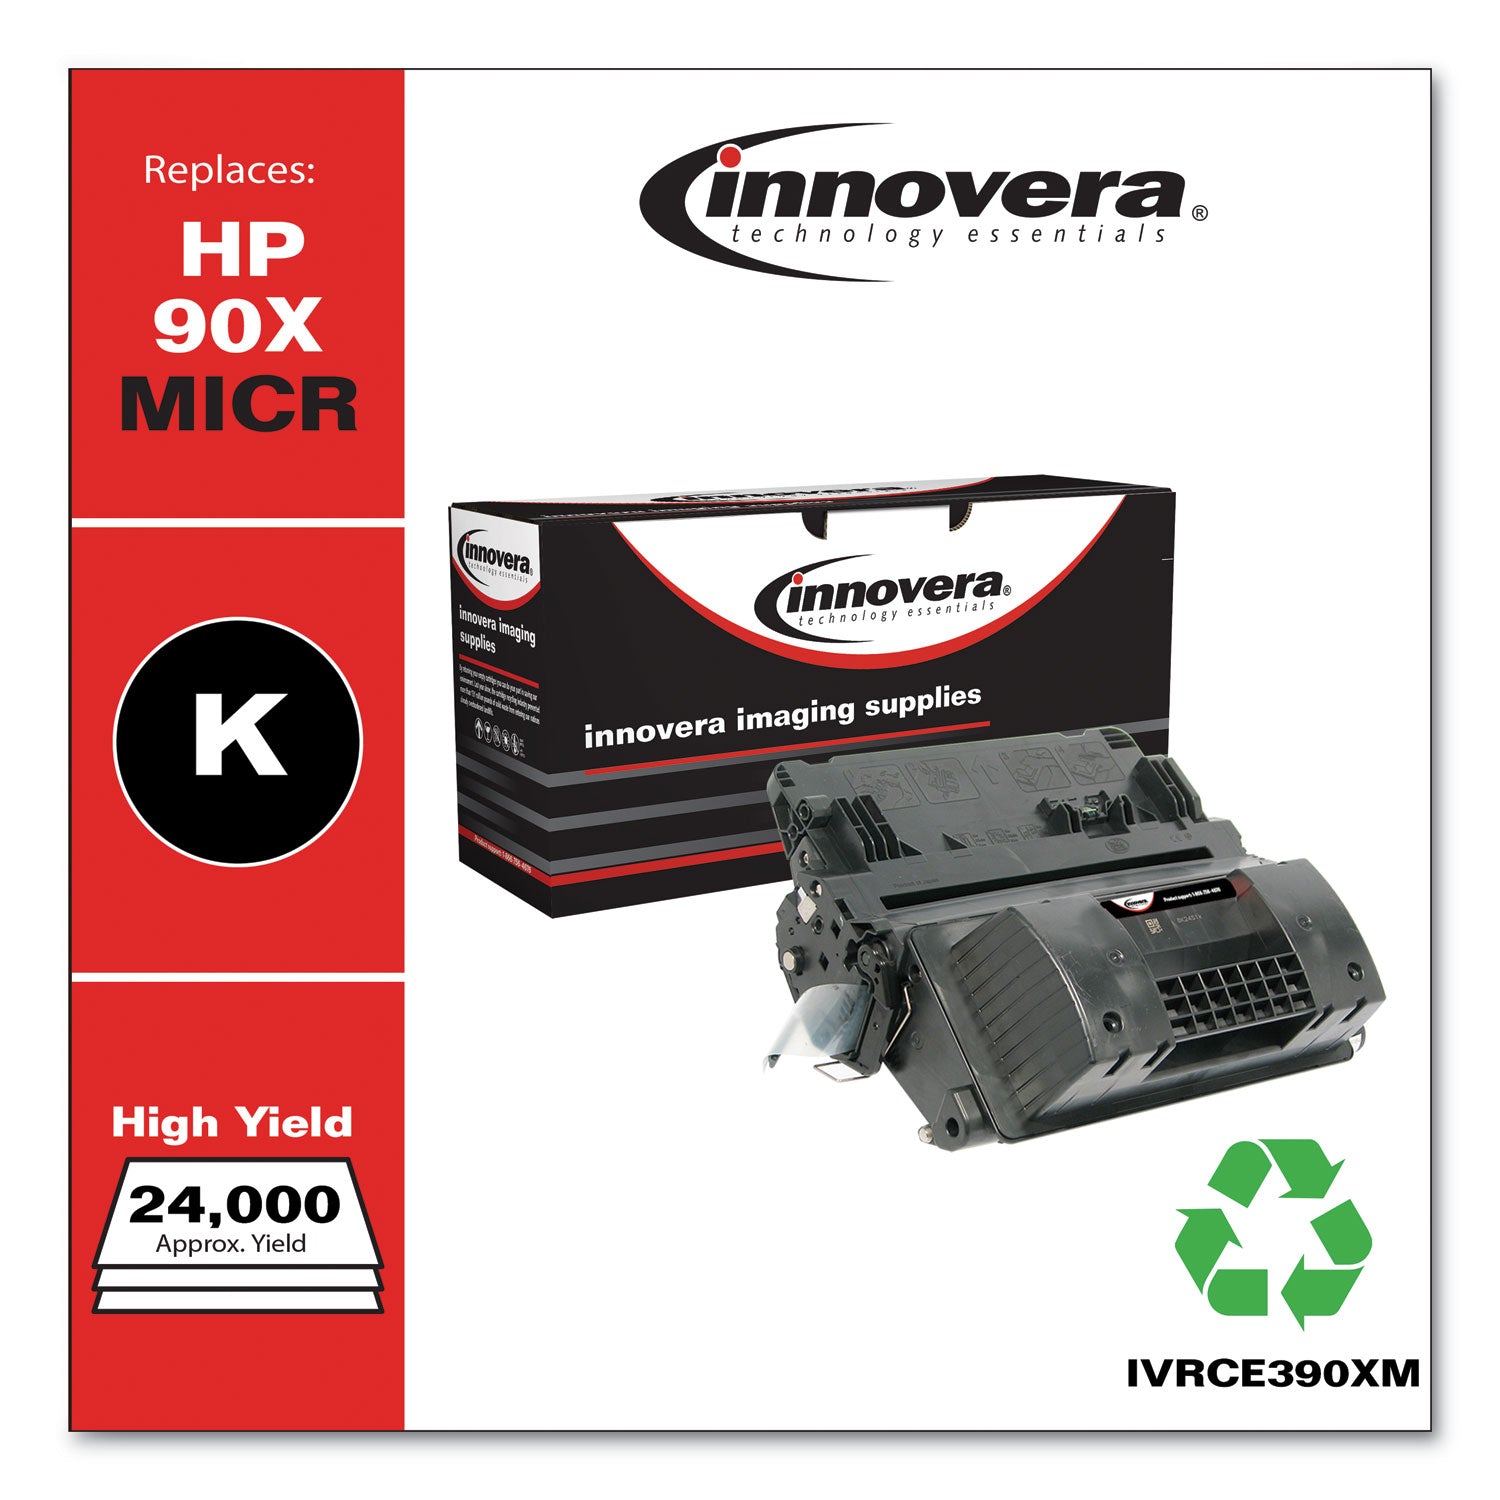 remanufactured-black-high-yield-micr-toner-replacement-for-90xm-ce390xm-24000-page-yield-ships-in-1-3-business-days_ivrce390xm - 2